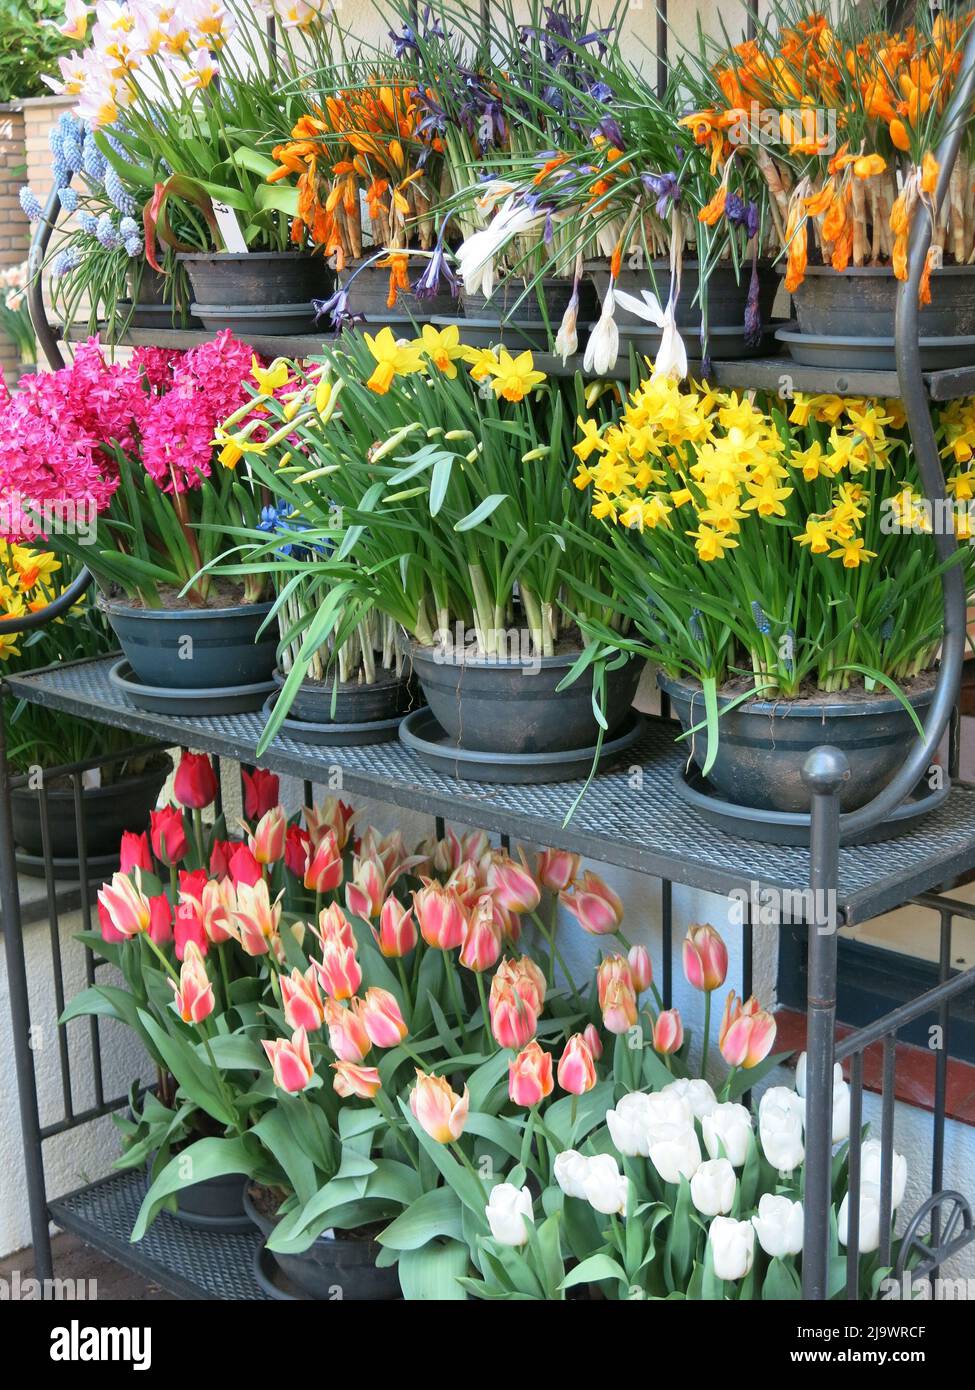 A 4 tier stand of spring bulbs in pots featuring tulips, daffodils, muscari & hyacinths: on display at  the annual Dutch flower festival, Keukenhof. Stock Photo